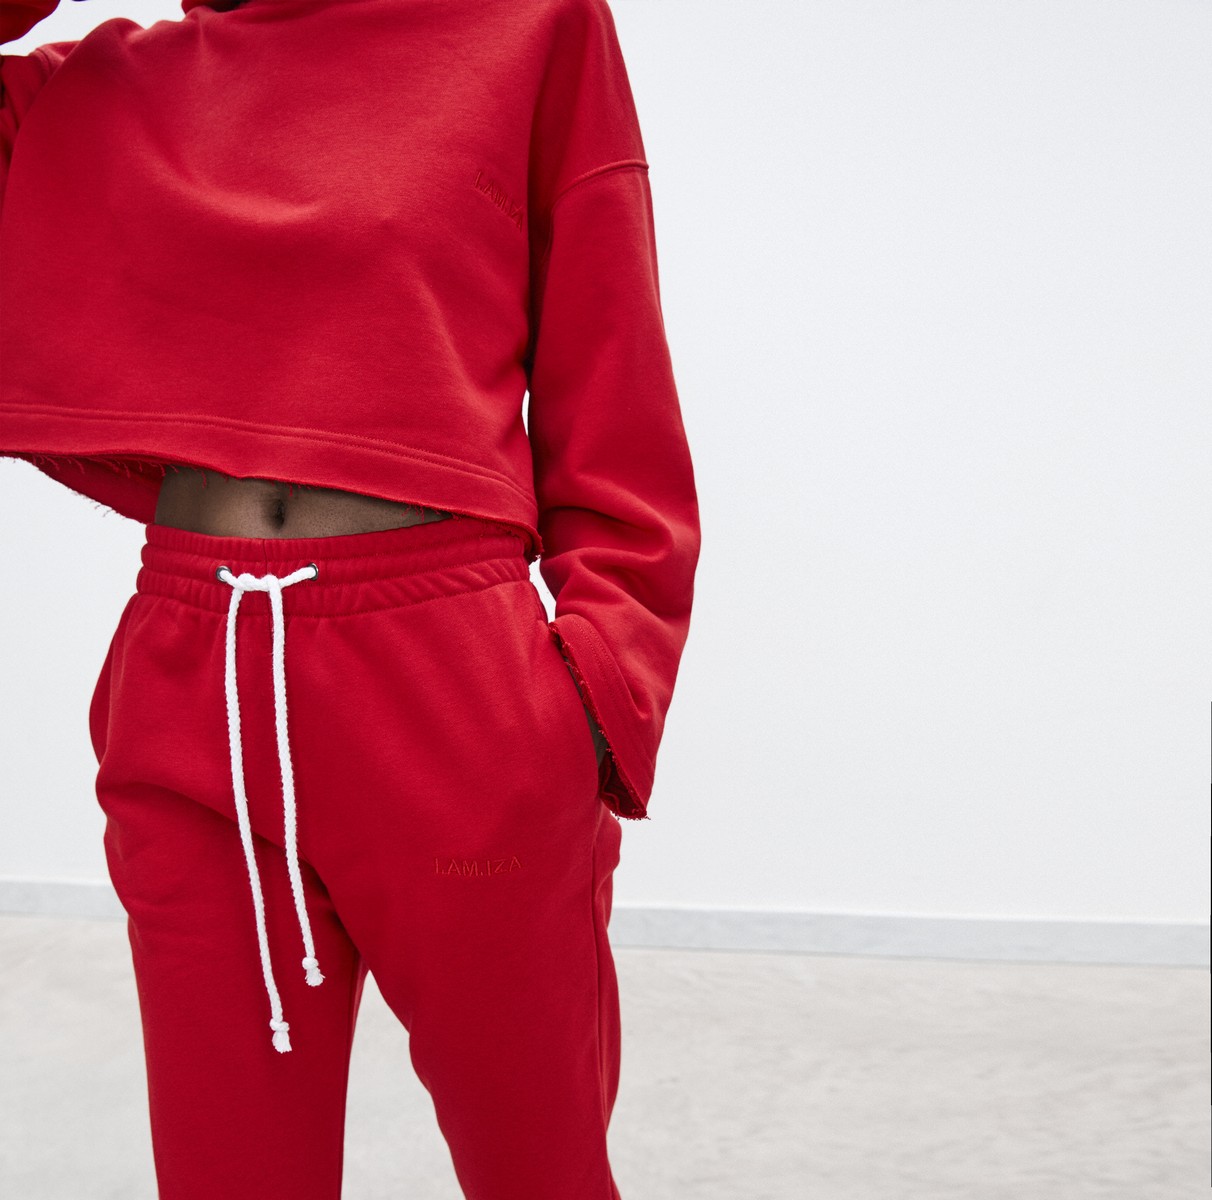 7.Ss22 HOODIE WITH LABEL AND PANTS